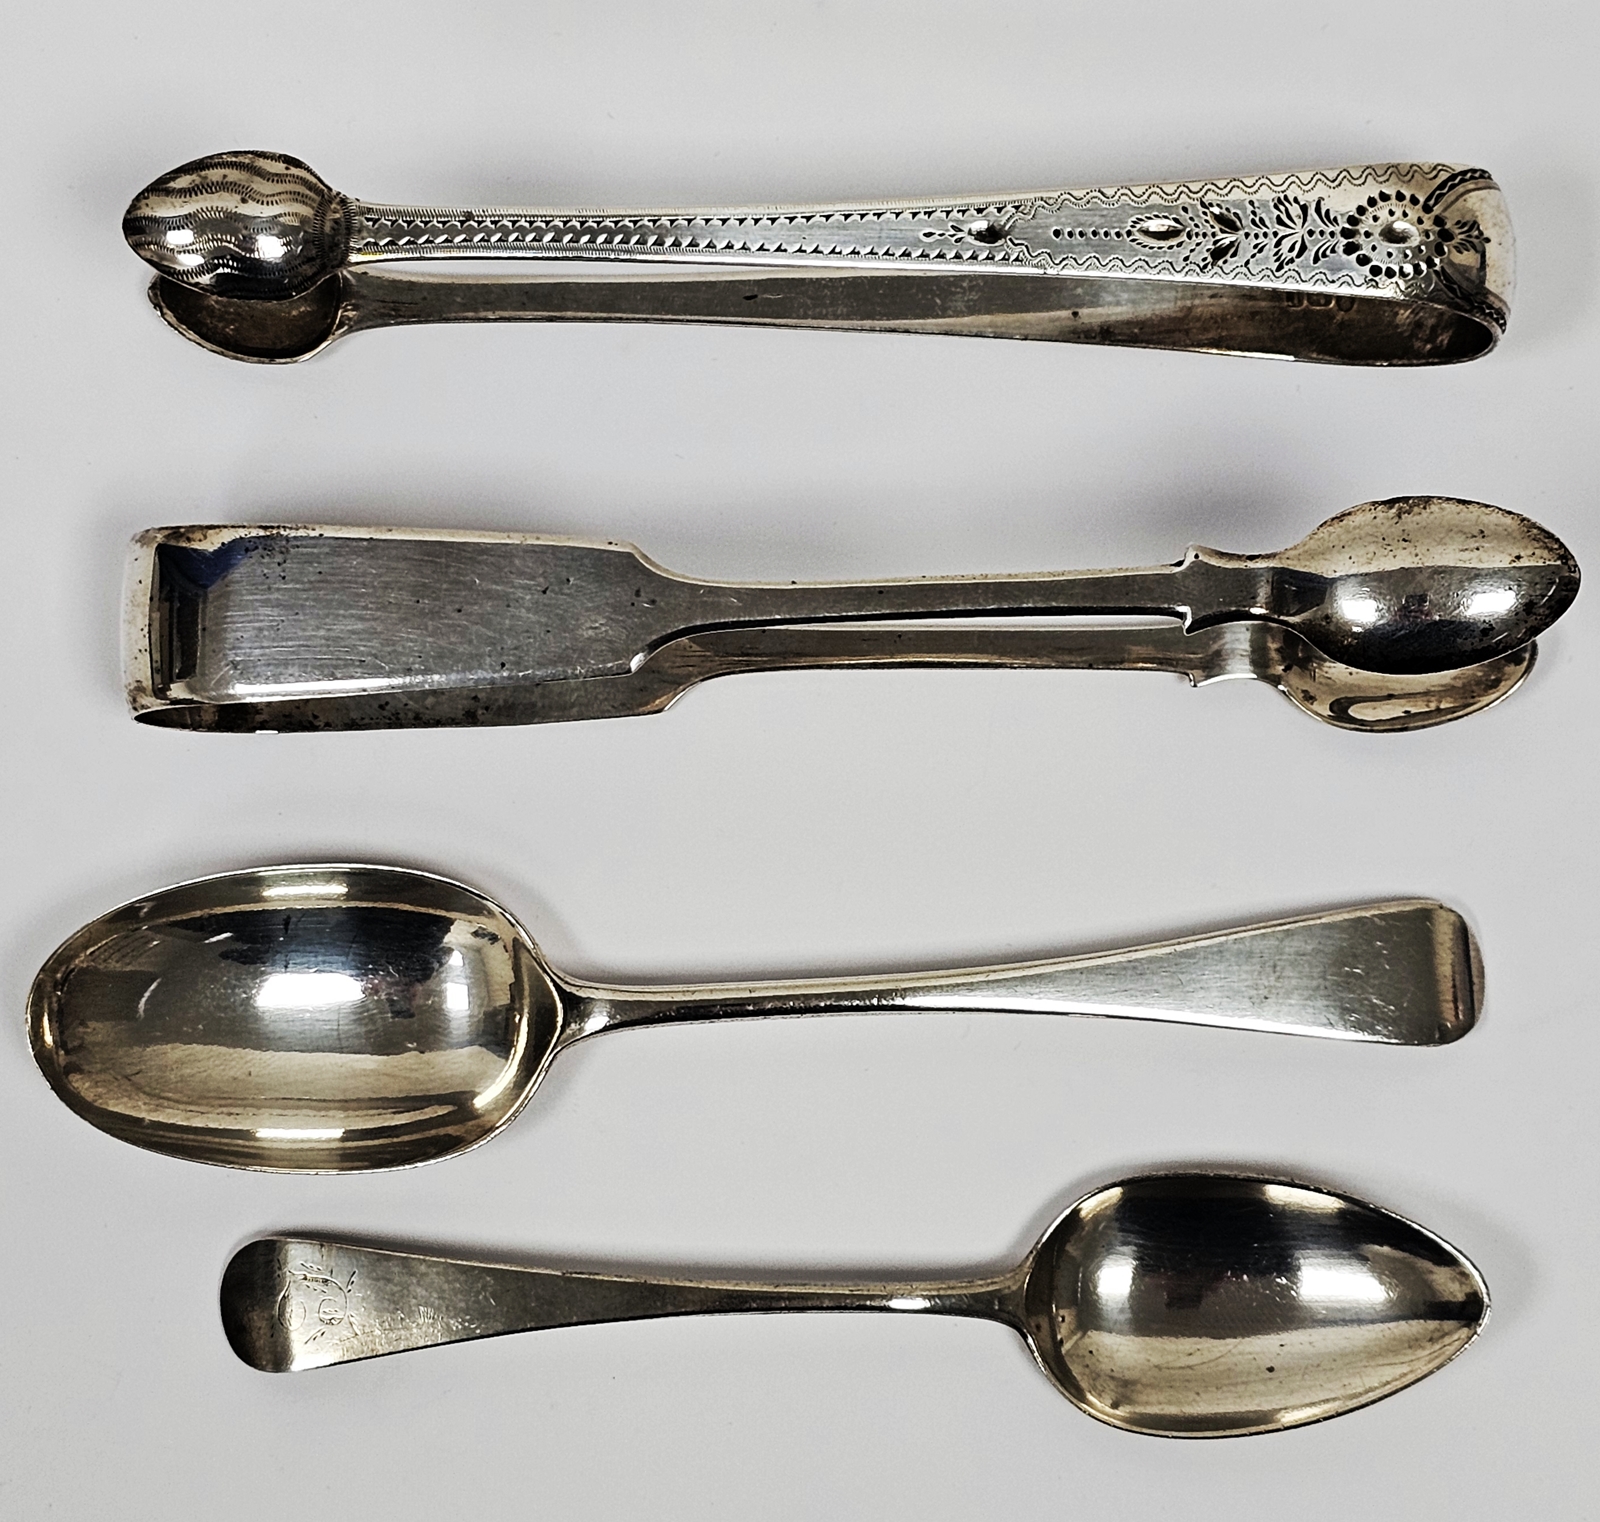 Pair of Victorian silver Fiddle pattern sugar tongs by John Walton, Newcastle 1855, a pair of